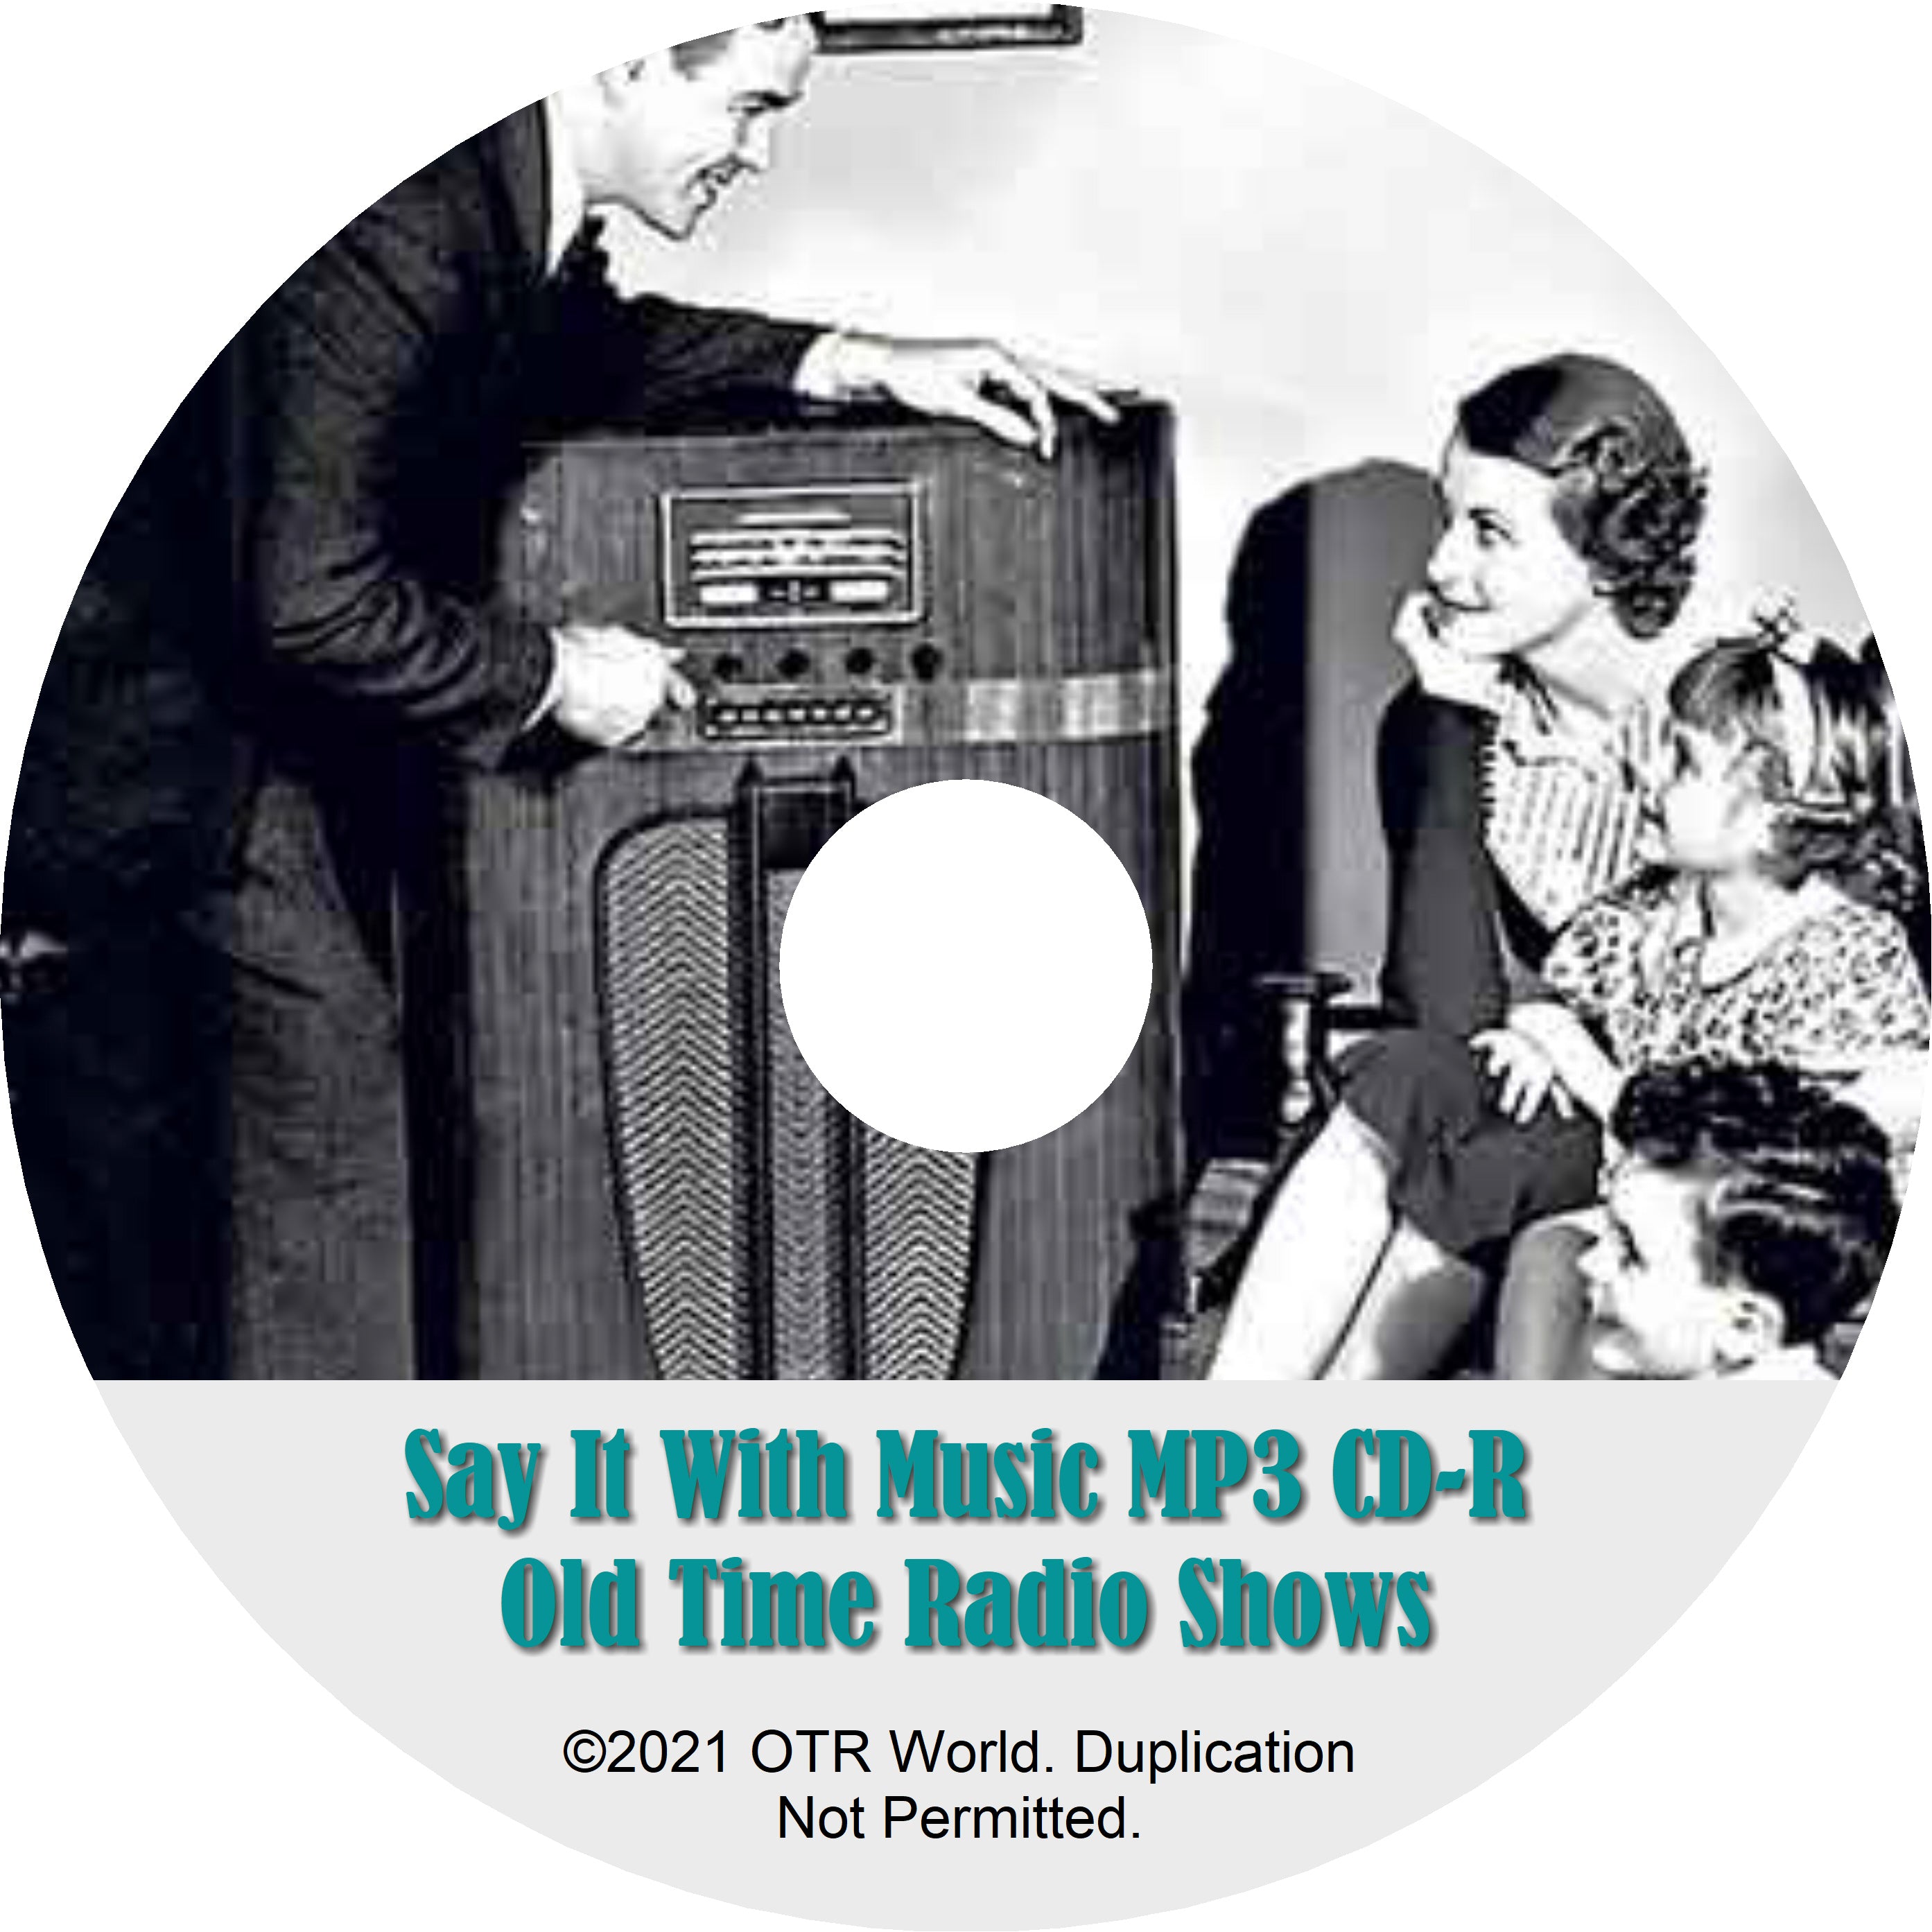 Say It With Music OTRS OTR Old Time Radio Shows MP3 On CD-R 2 Episodes